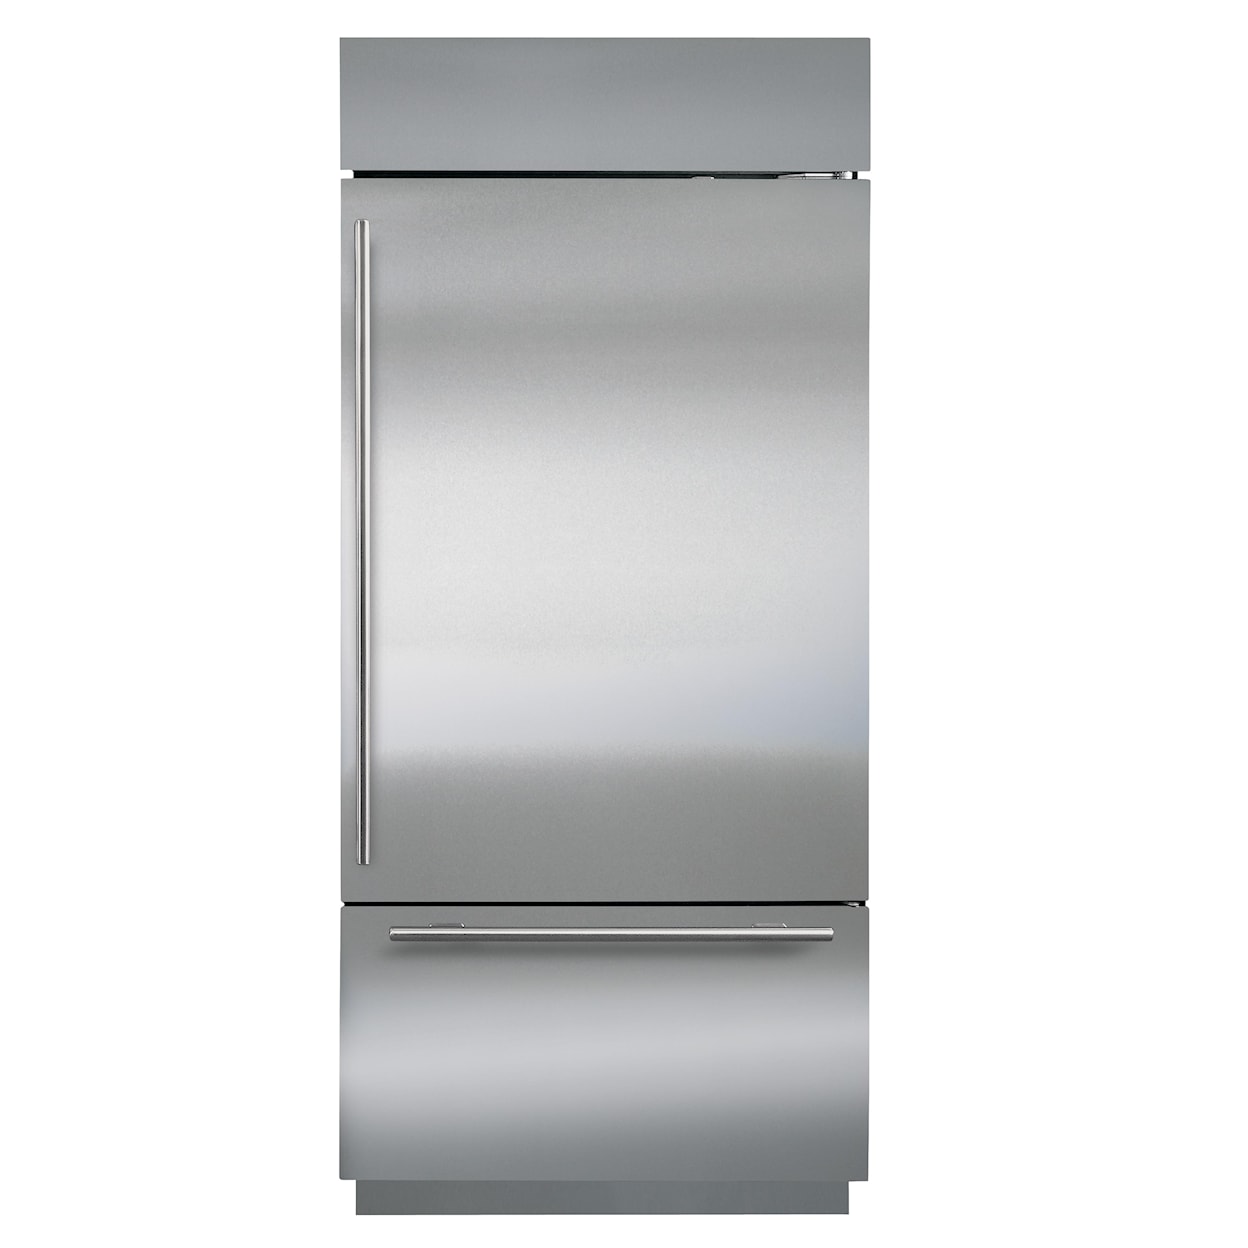 Sub-Zero Built-In Refrigeration 36" Built-In Over-and-Under Refrigerator